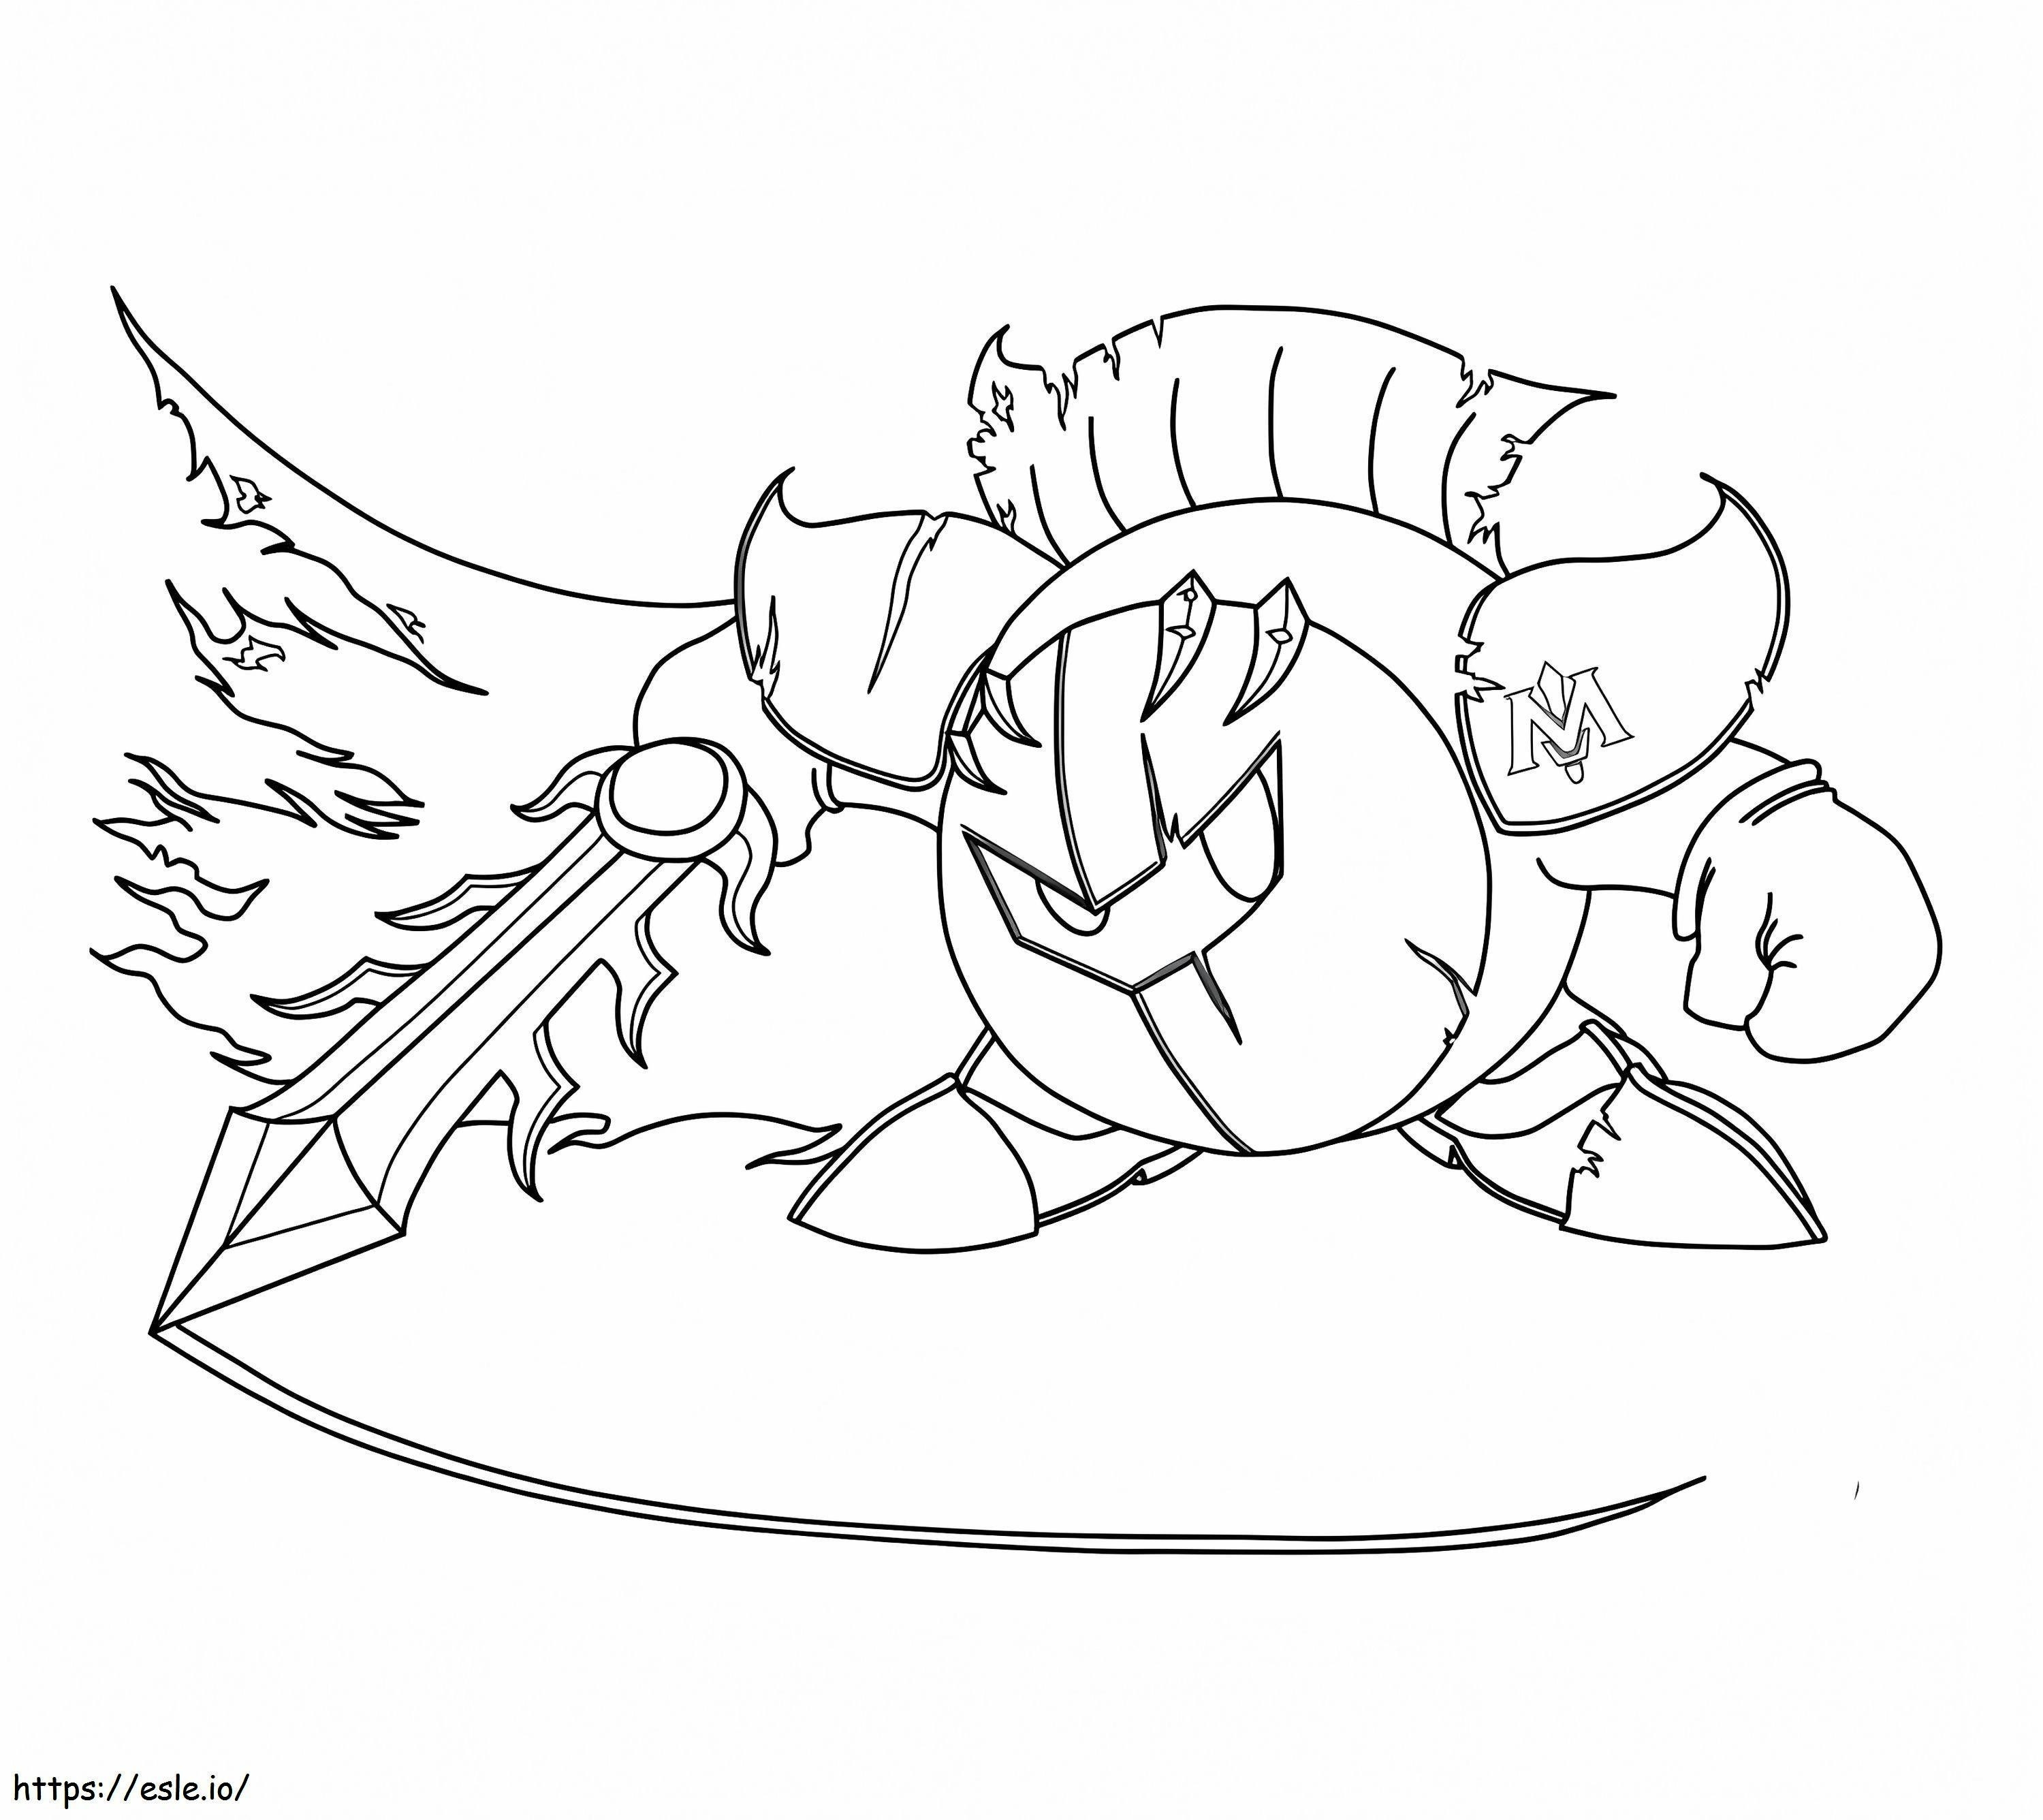 Meta Knight 1 coloring page